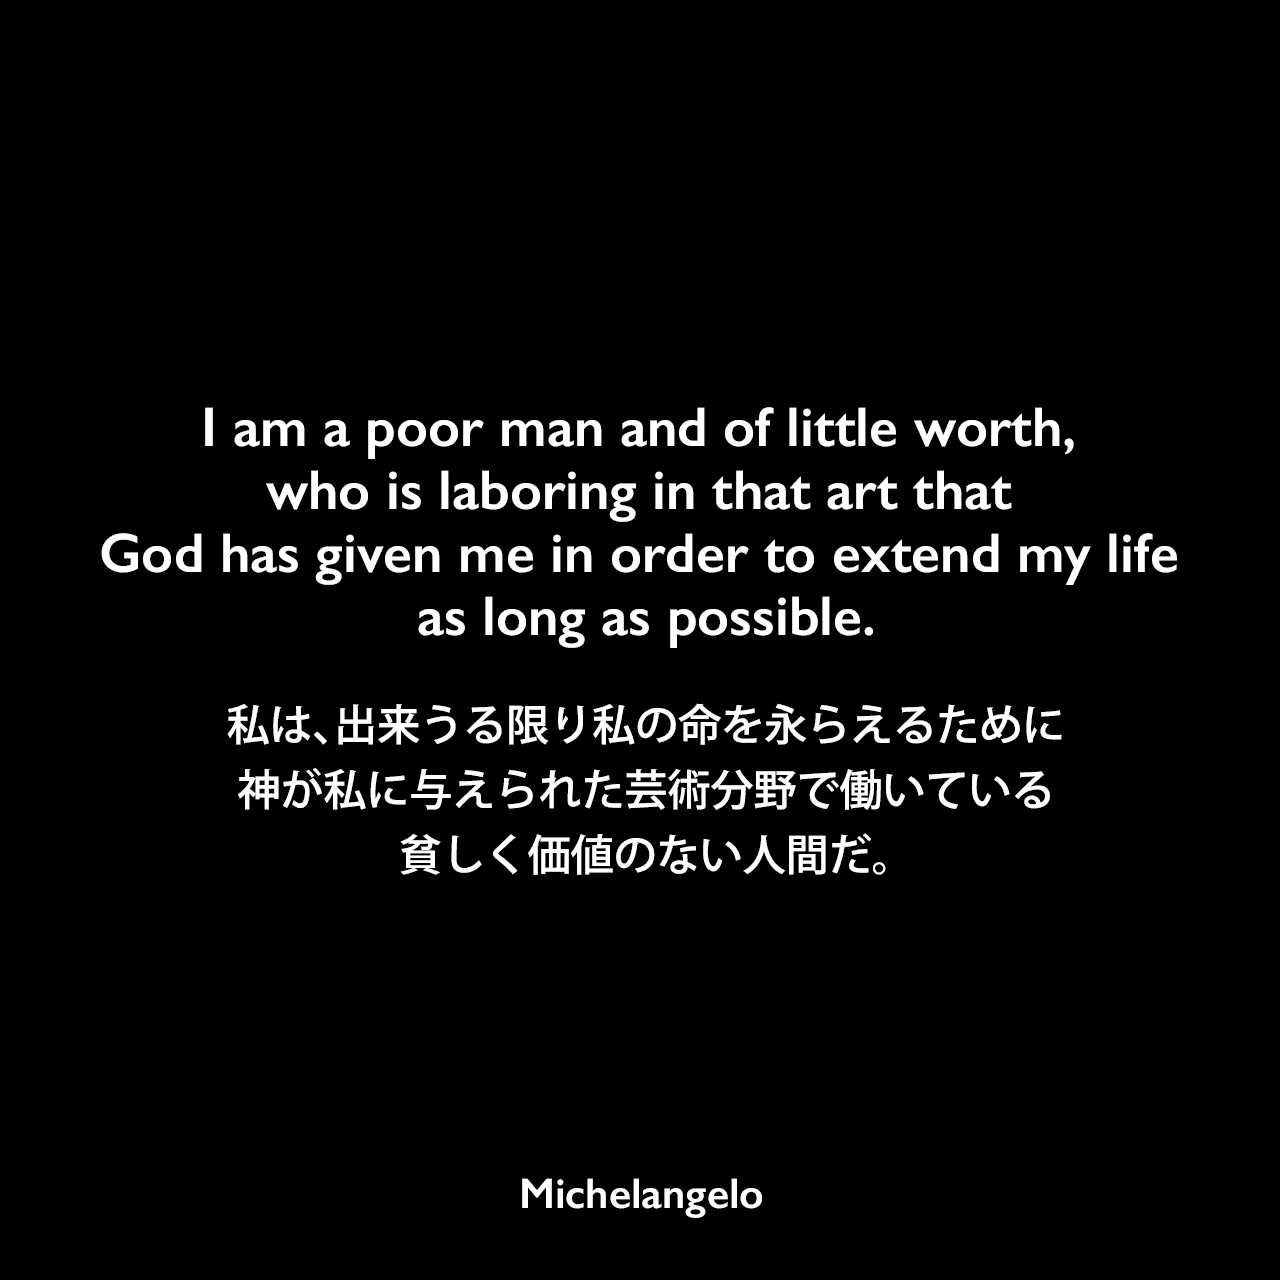 I am a poor man and of little worth, who is laboring in that art that God has given me in order to extend my life as long as possible.私は、出来うる限り私の命を永らえるために、神が私に与えられた芸術分野で働いている、貧しく価値のない人間だ。Michelangelo